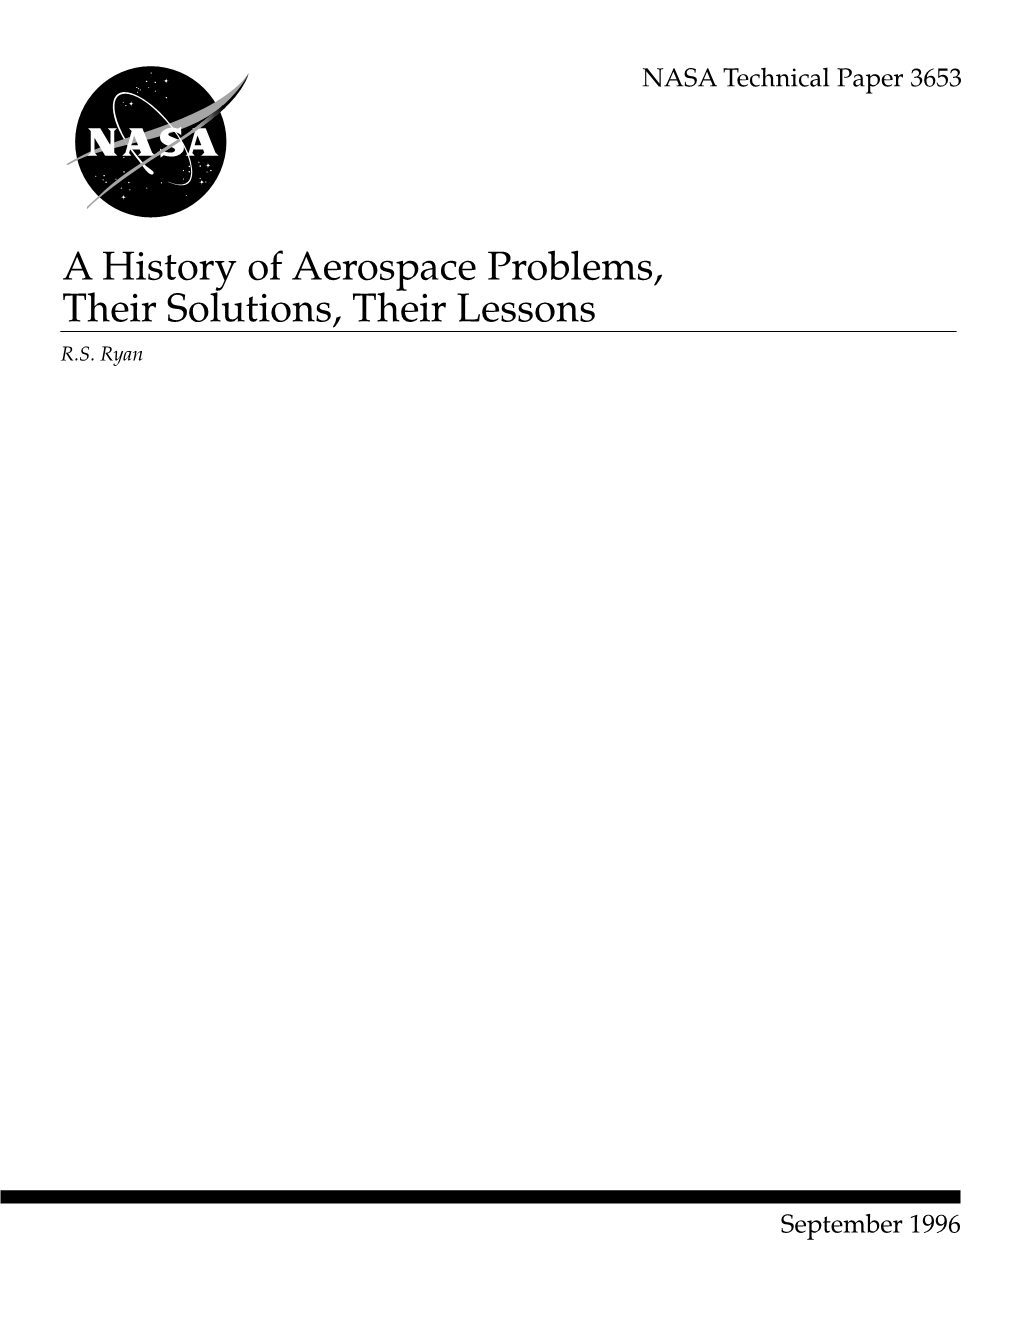 A History of Aerospace Problems, Their Solutions, Their Lessons R.S